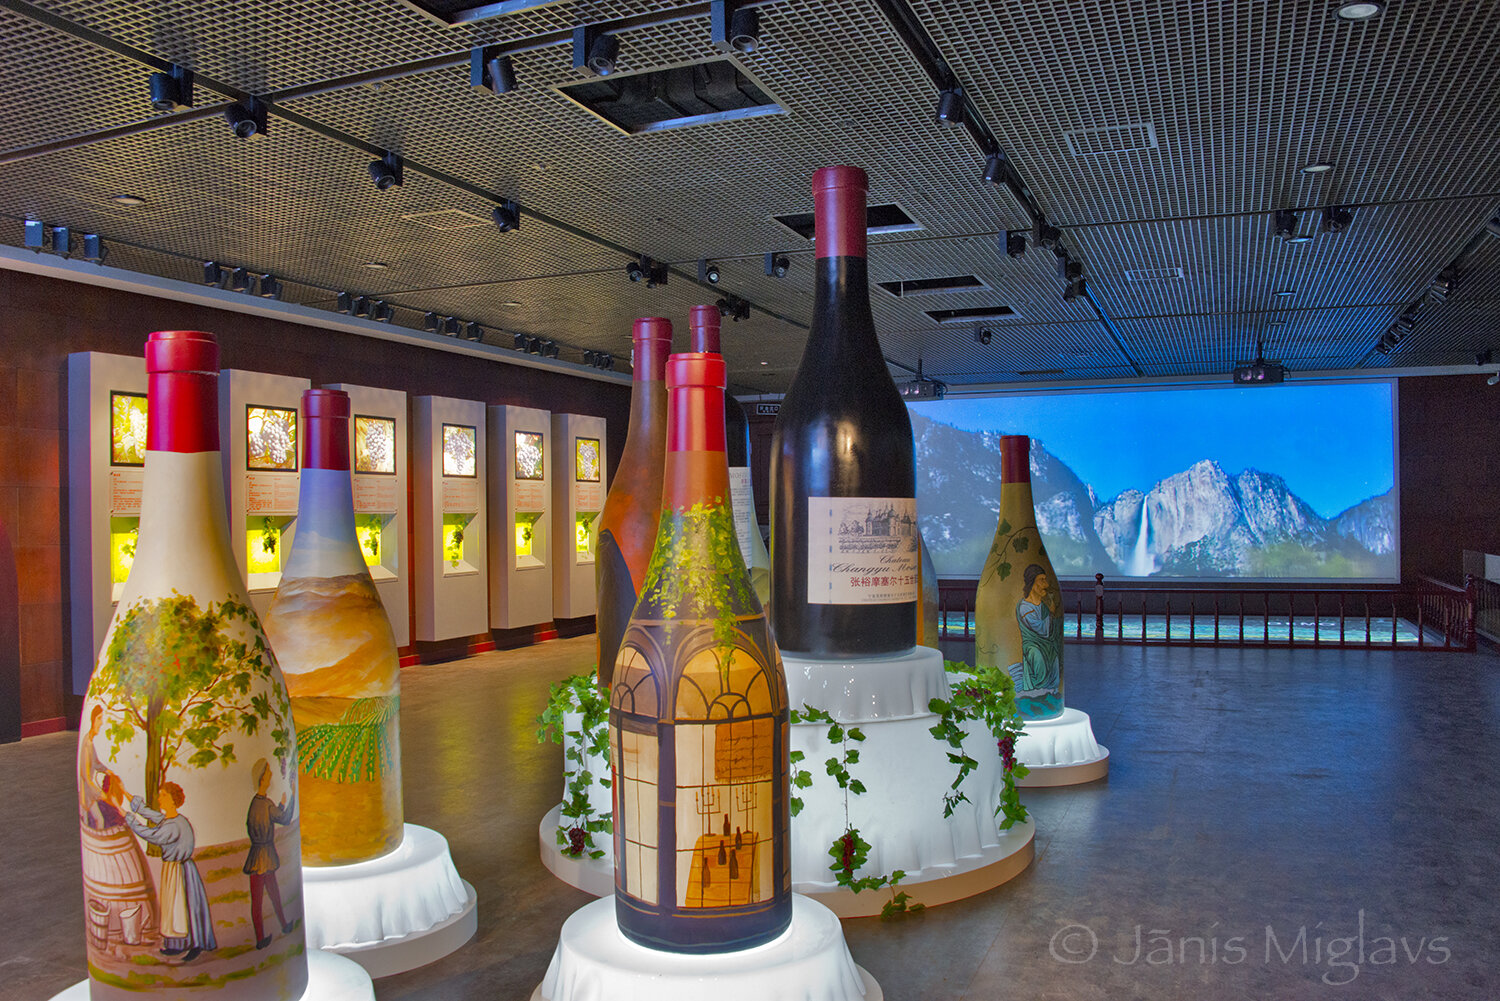 Hand painted people-sized wine bottles and pictures of Yosemite Falls are part of the Chateau Moser winery display area.